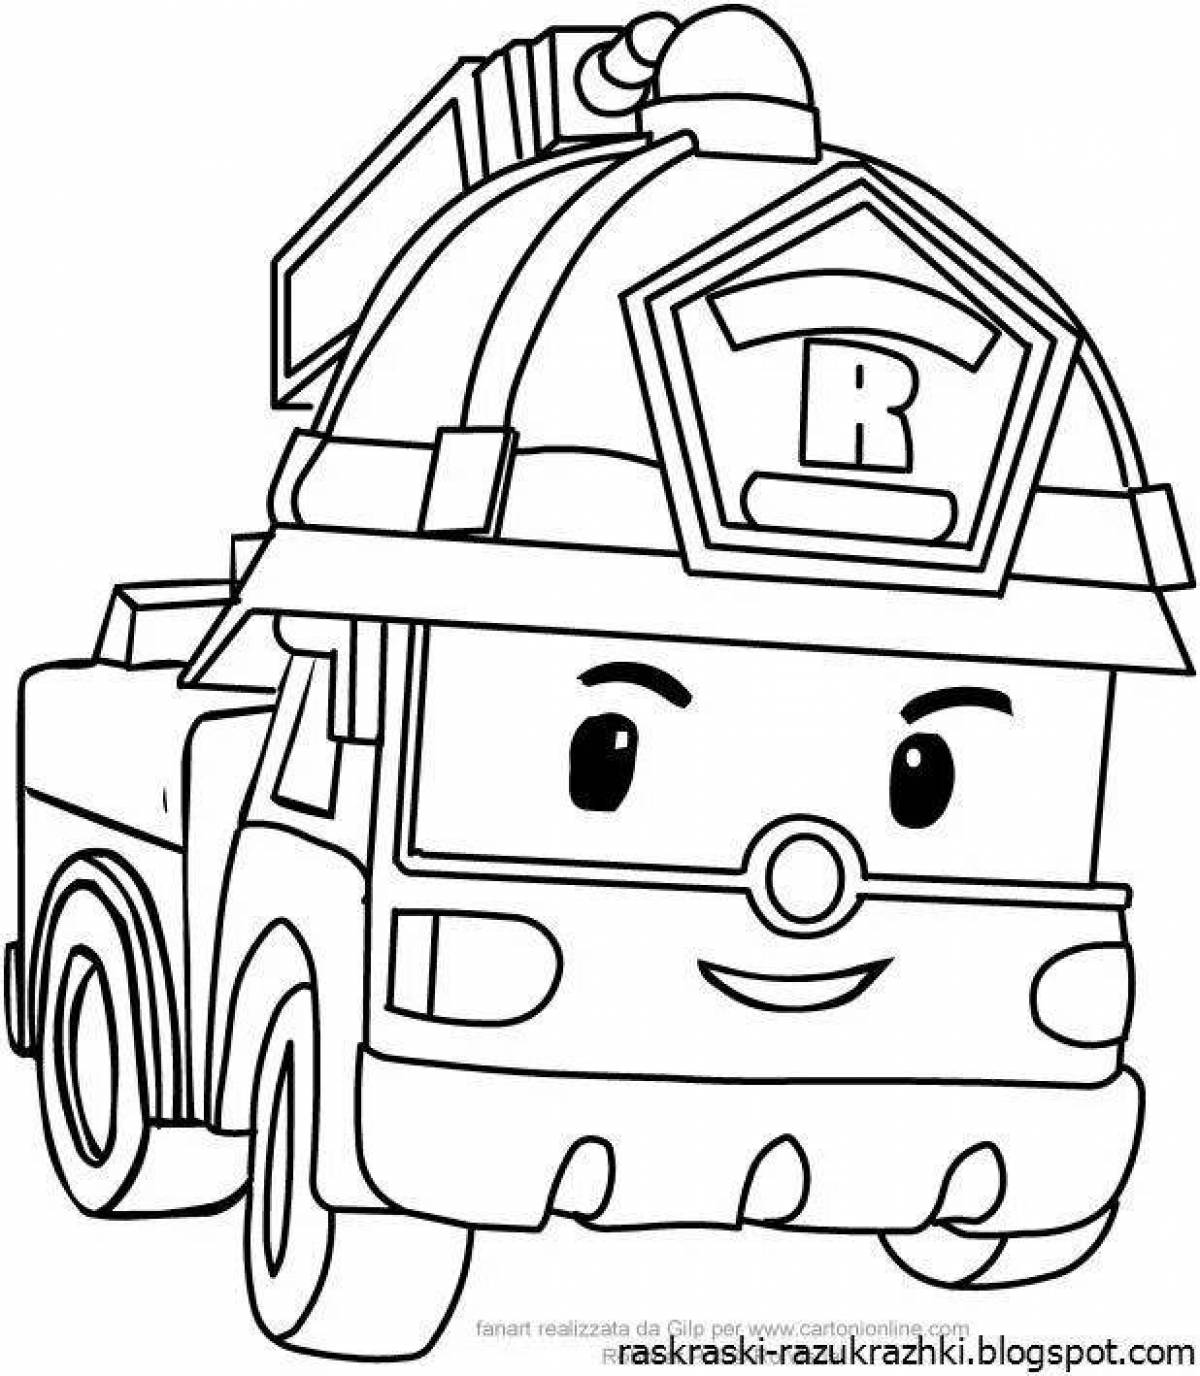 Robocar poly creative coloring book for kids 3-4 years old